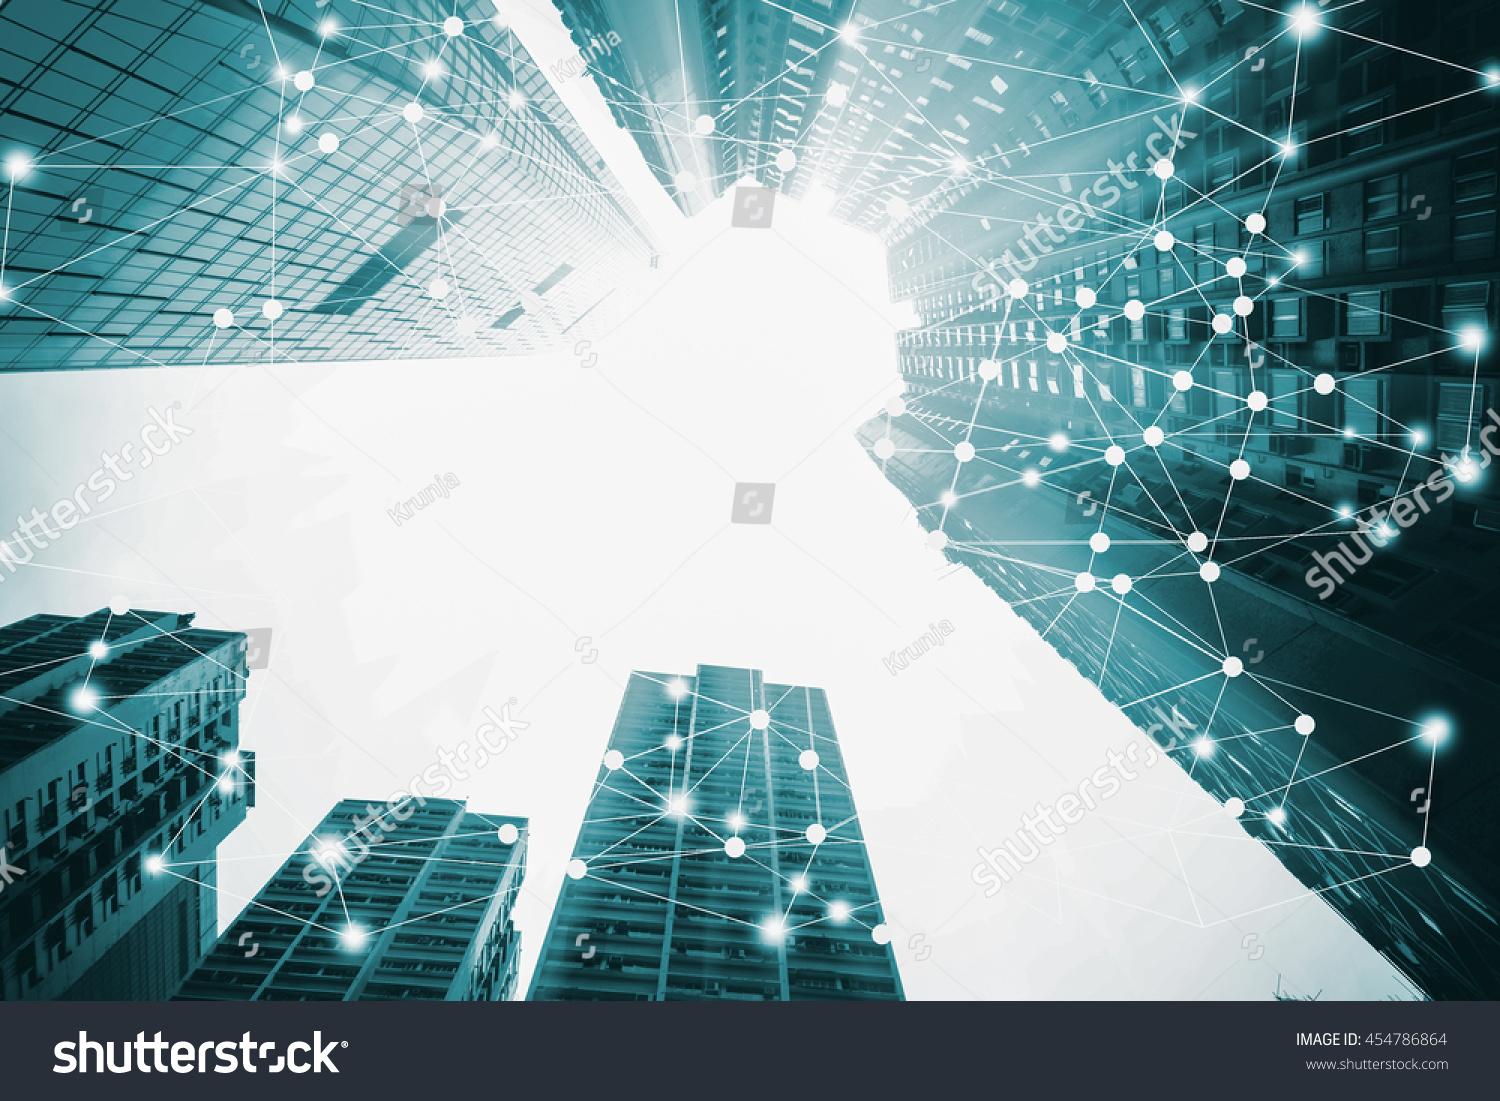 Smart city and internet of things, wireless communication network, abstract image visual #454786864